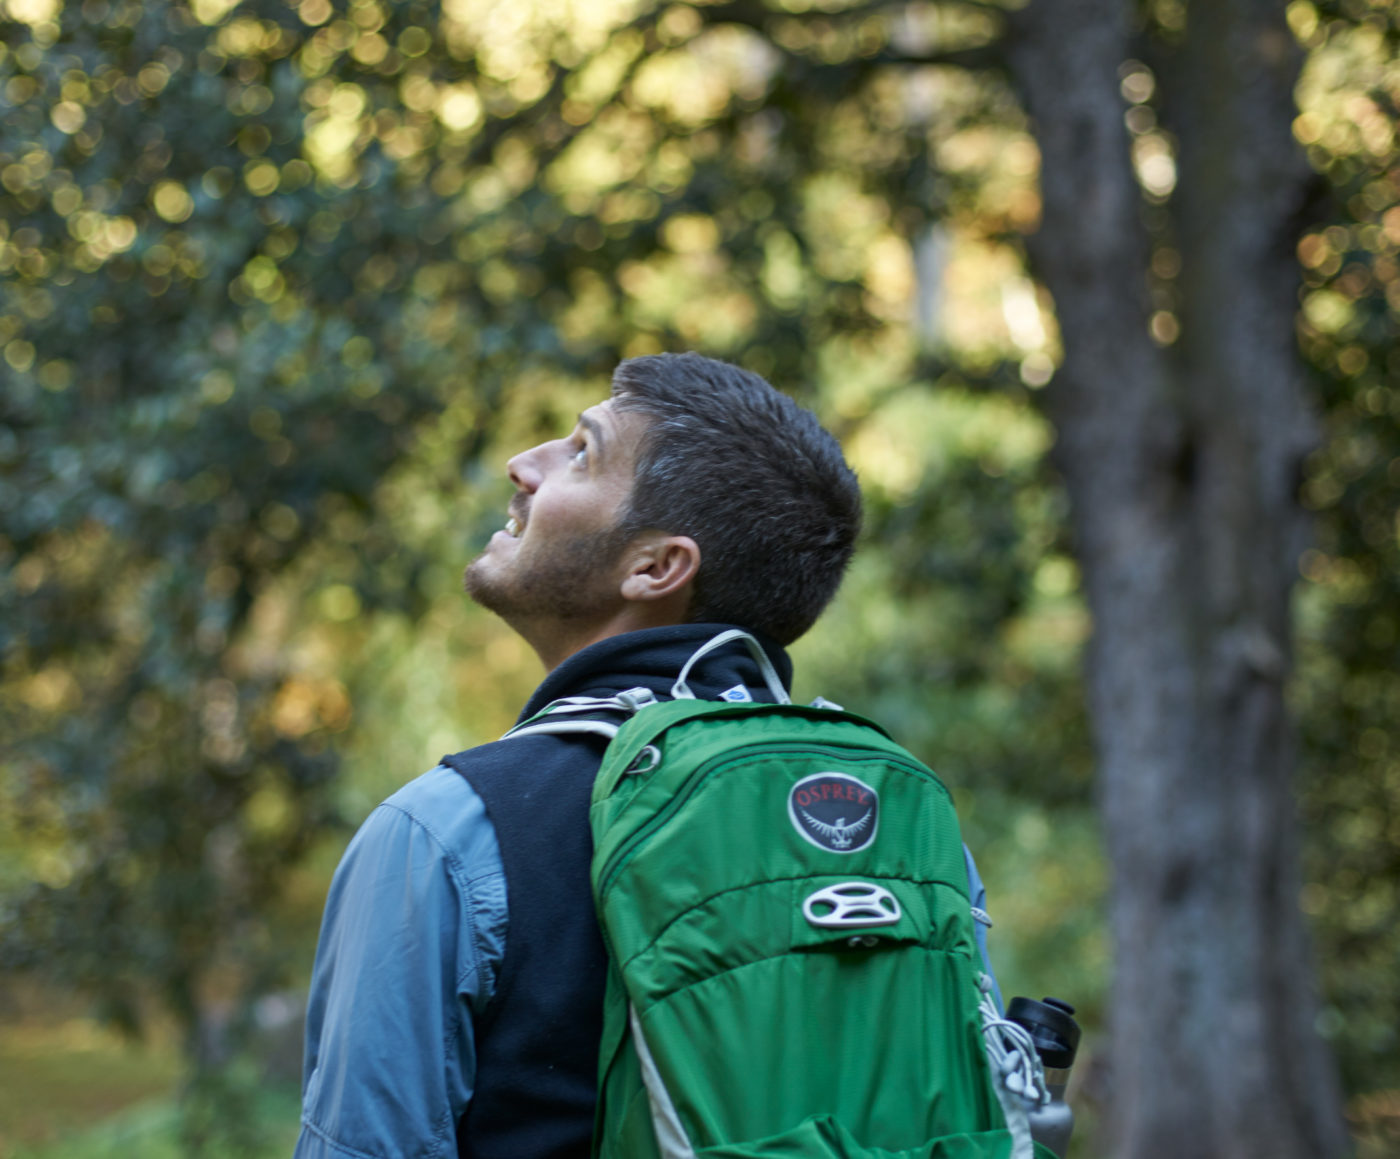 A man wearing a green backpack looks upwards through the woods.